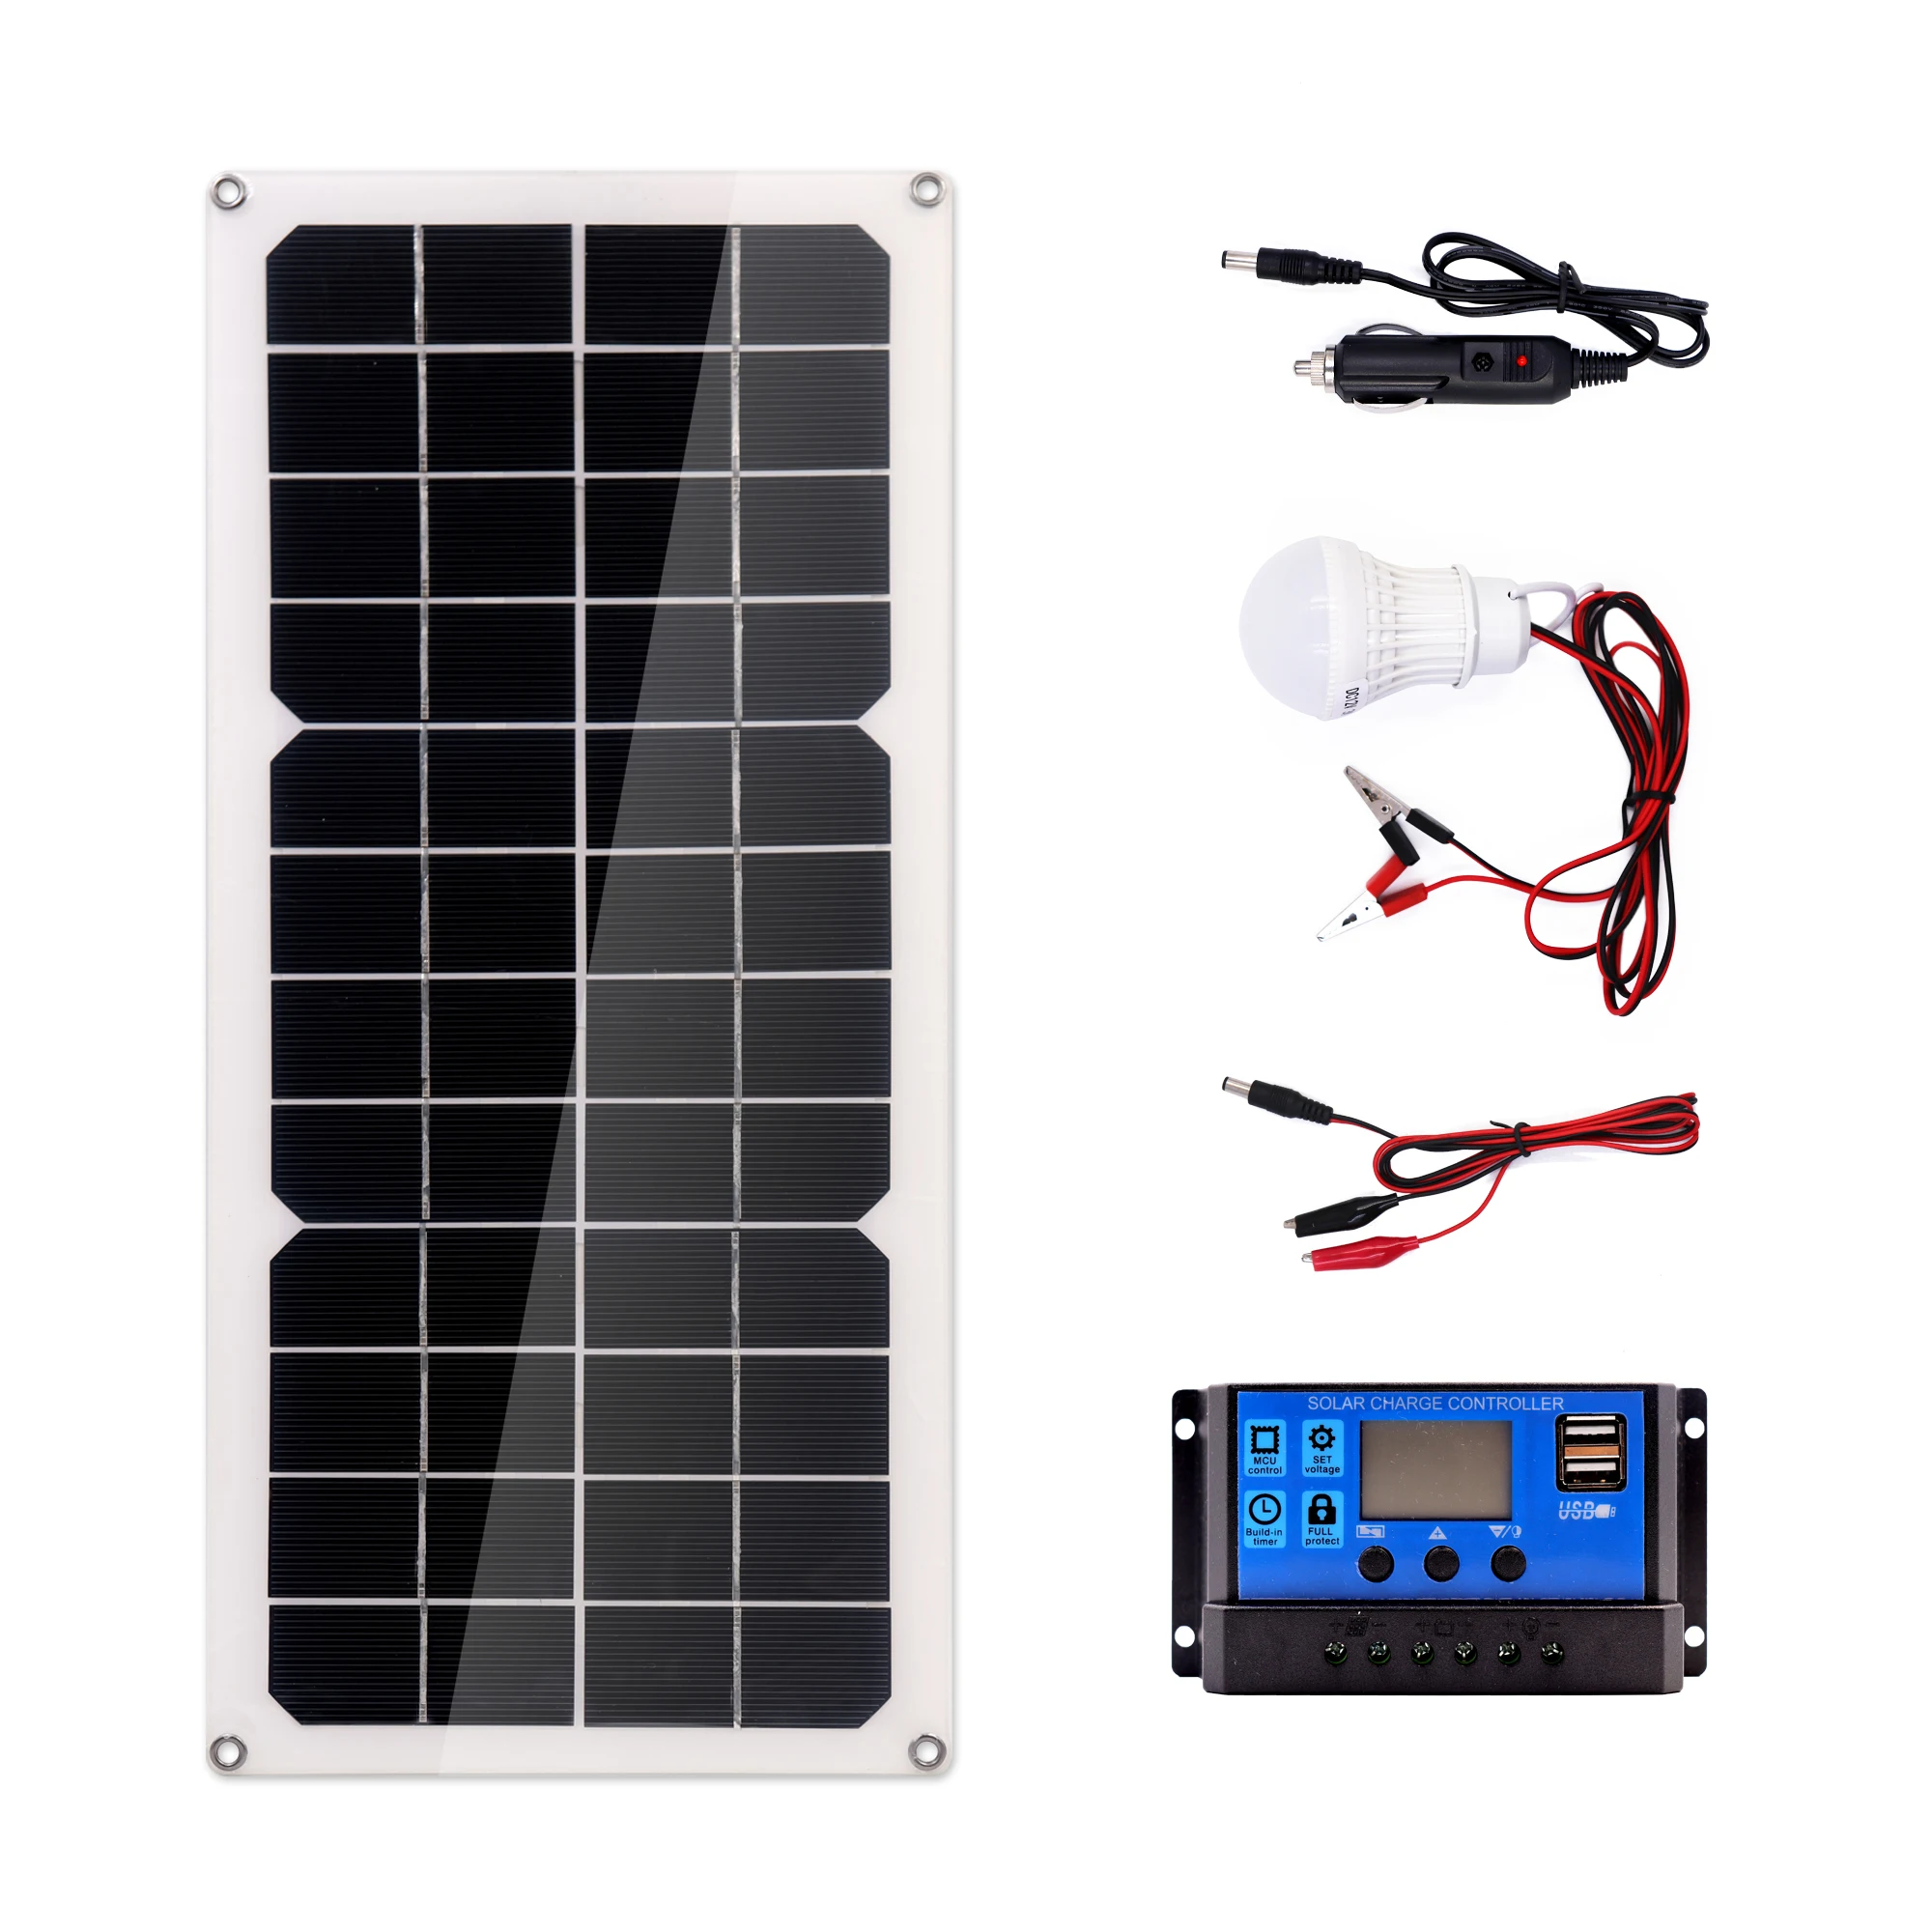 

10W Portable Solar Pane Charger + 10A Controller + 3W Light Bulb Solar Battery for Car Boat Camping DC Alligator clips Connector